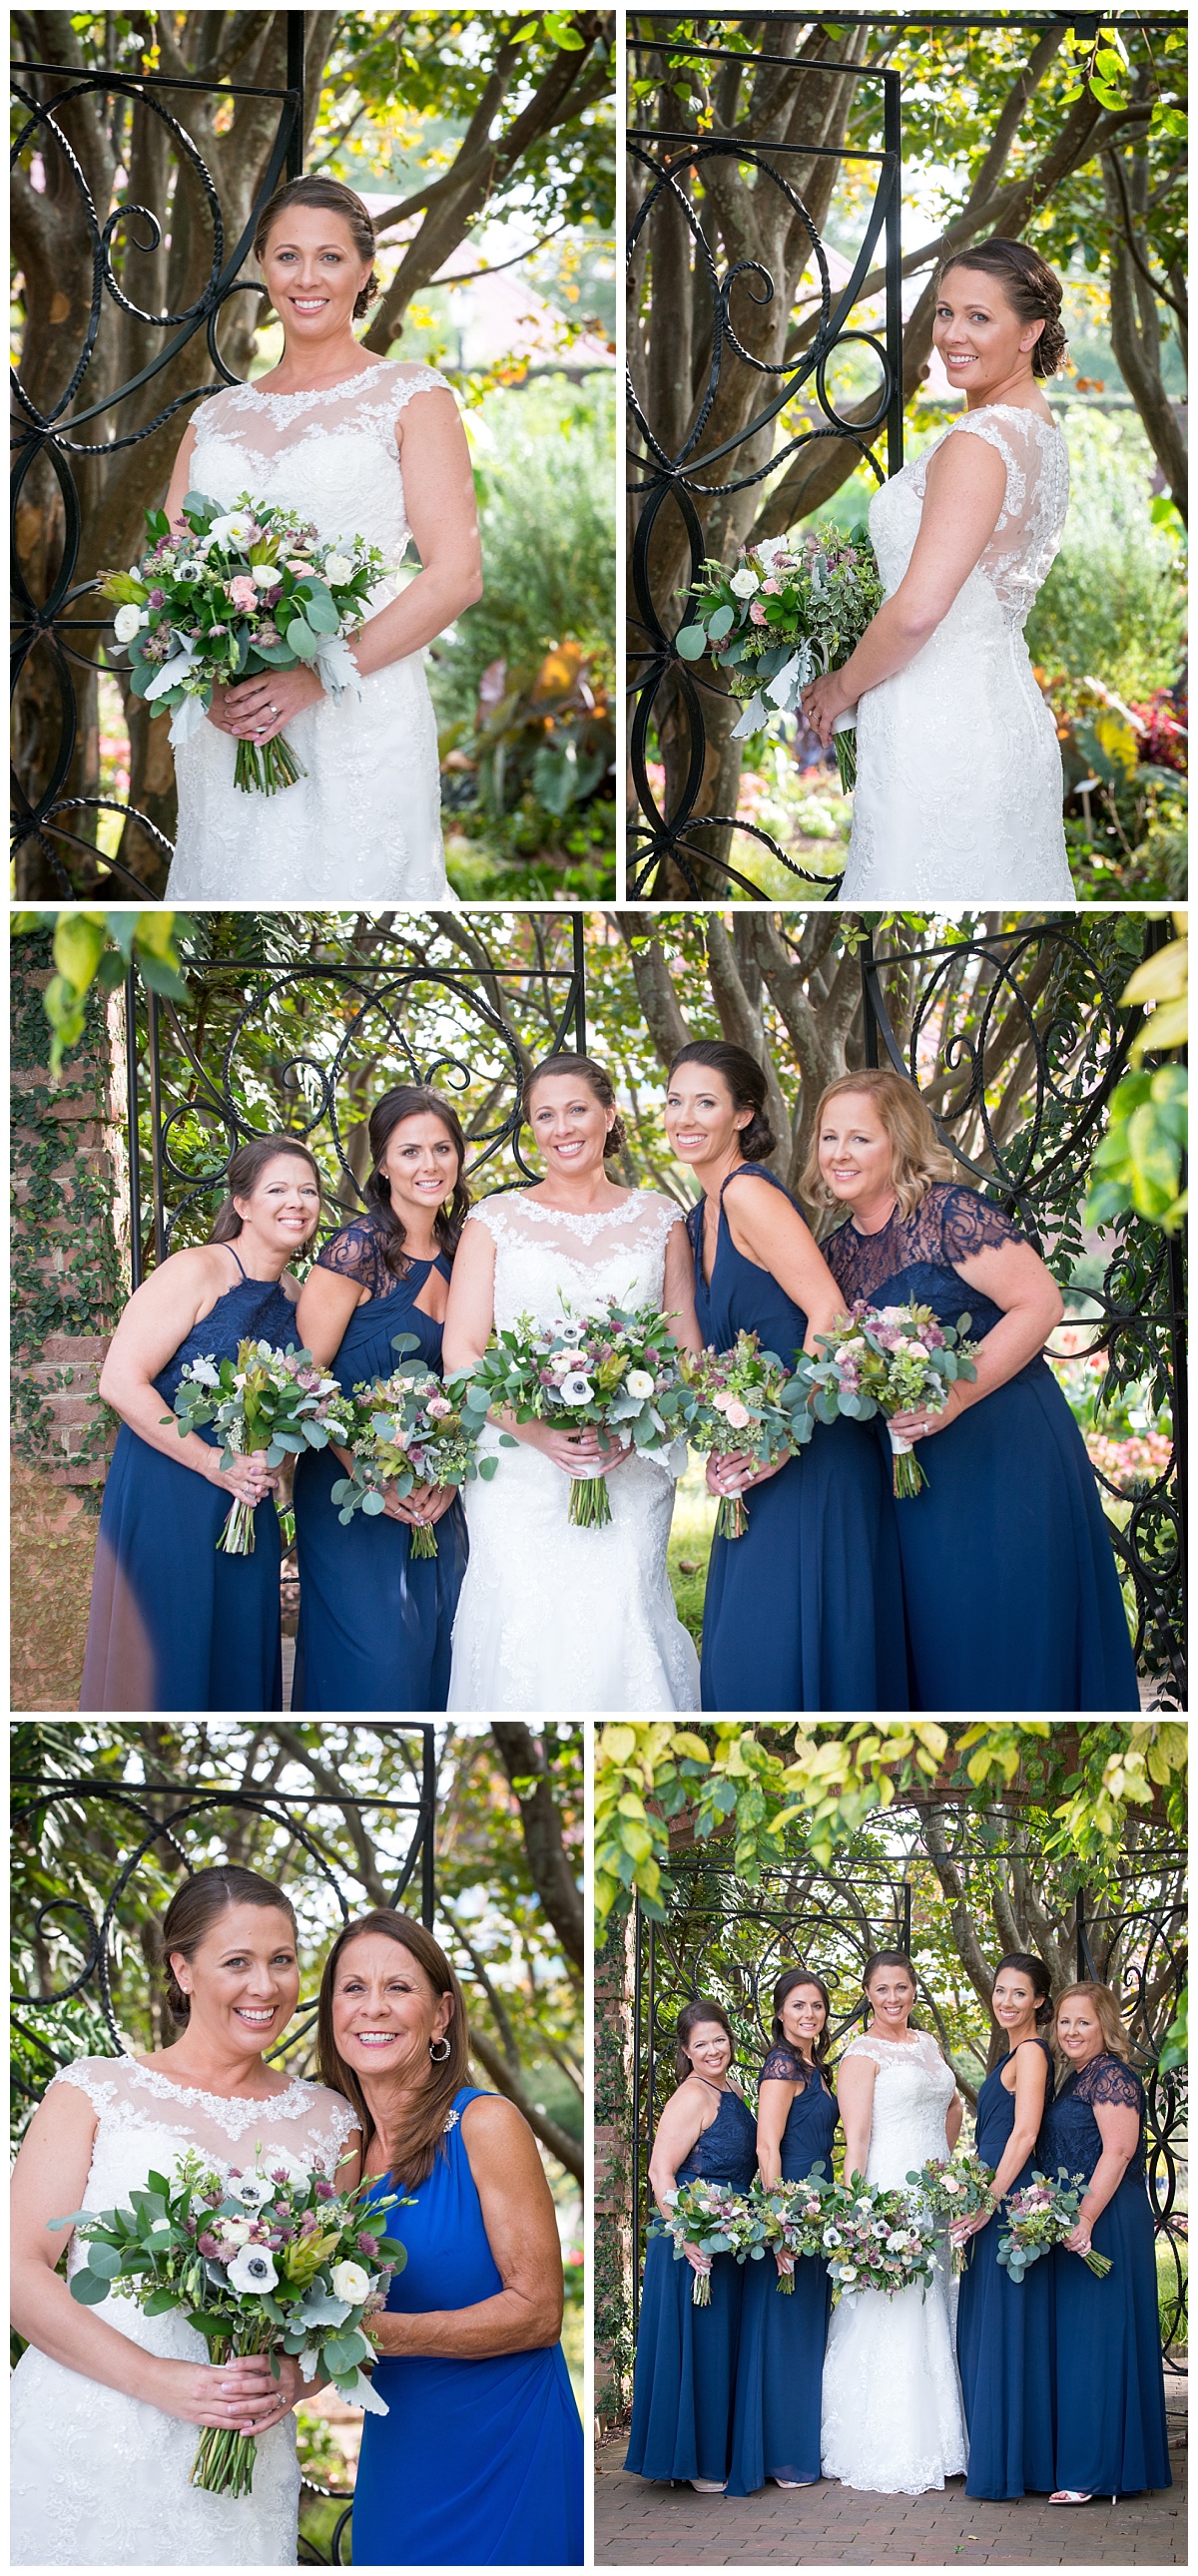 Bridesmaid in navy gowns